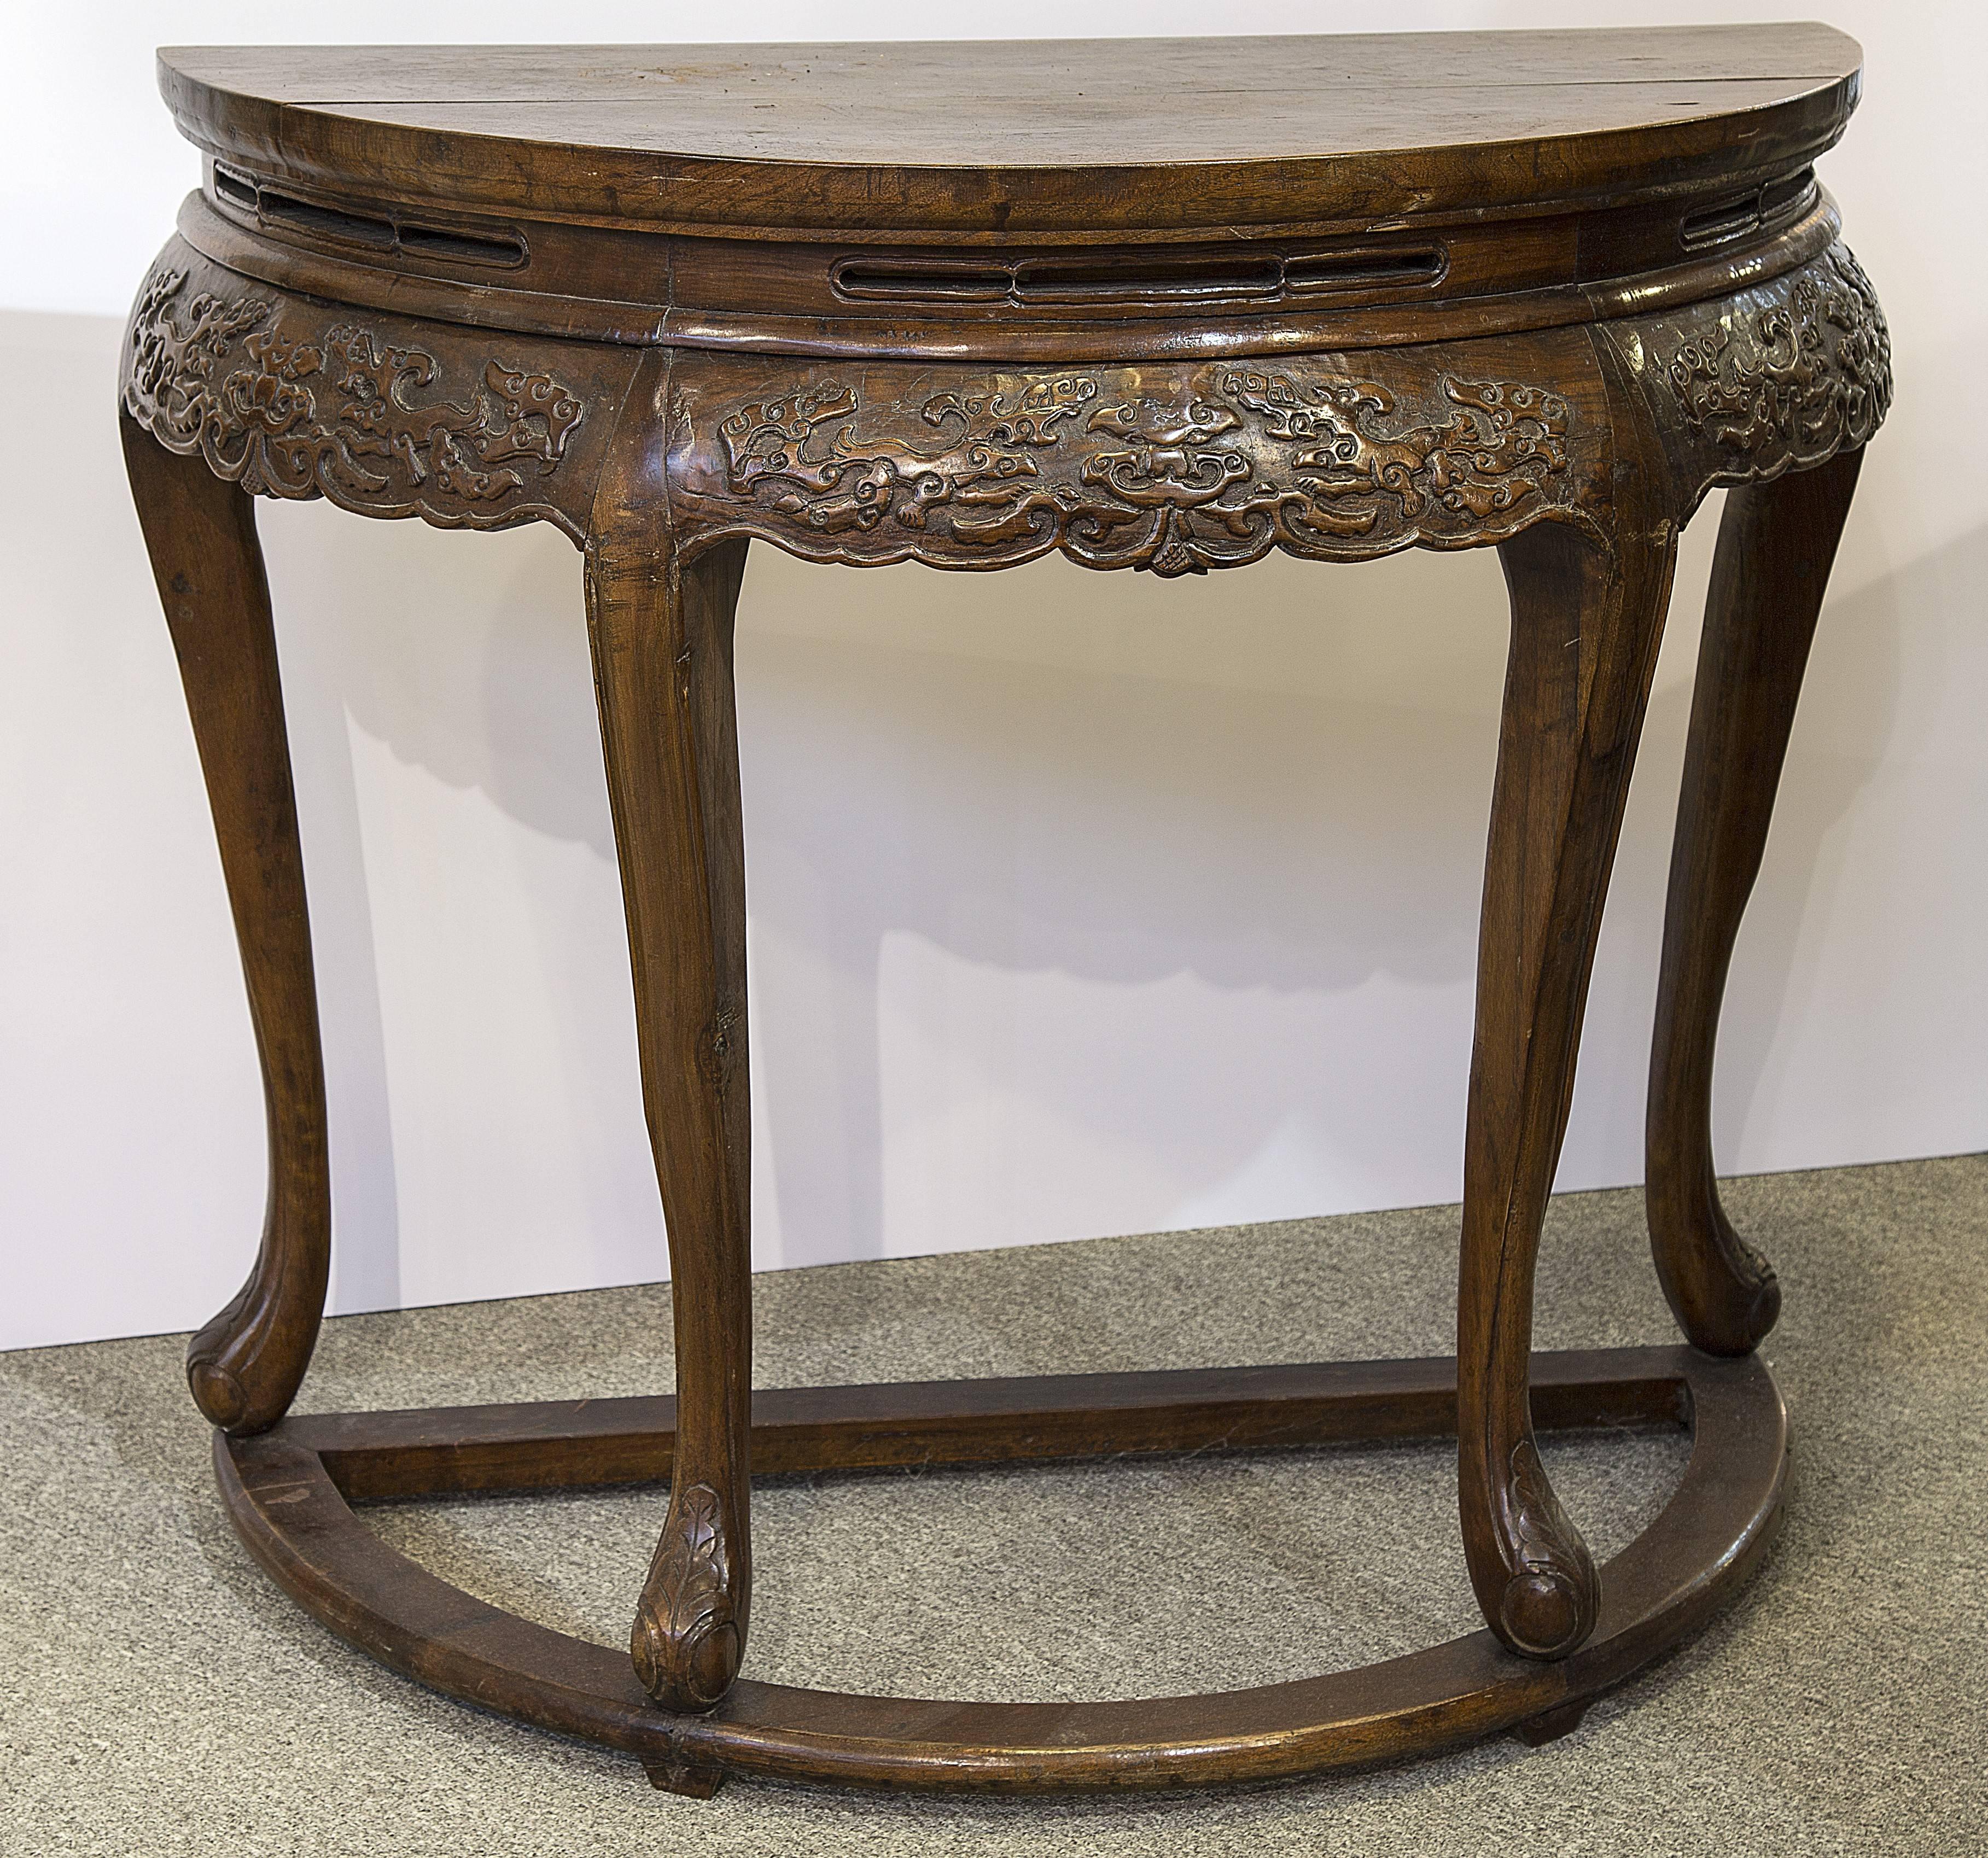 Matched pair of demilune or king tables with cabriole legs and a confronting dragons apron. The consoles fir together to make a 35 inch round center table. One handmade console is 17.5 inches deep and the other is 17.75 inch deep. The wood is most